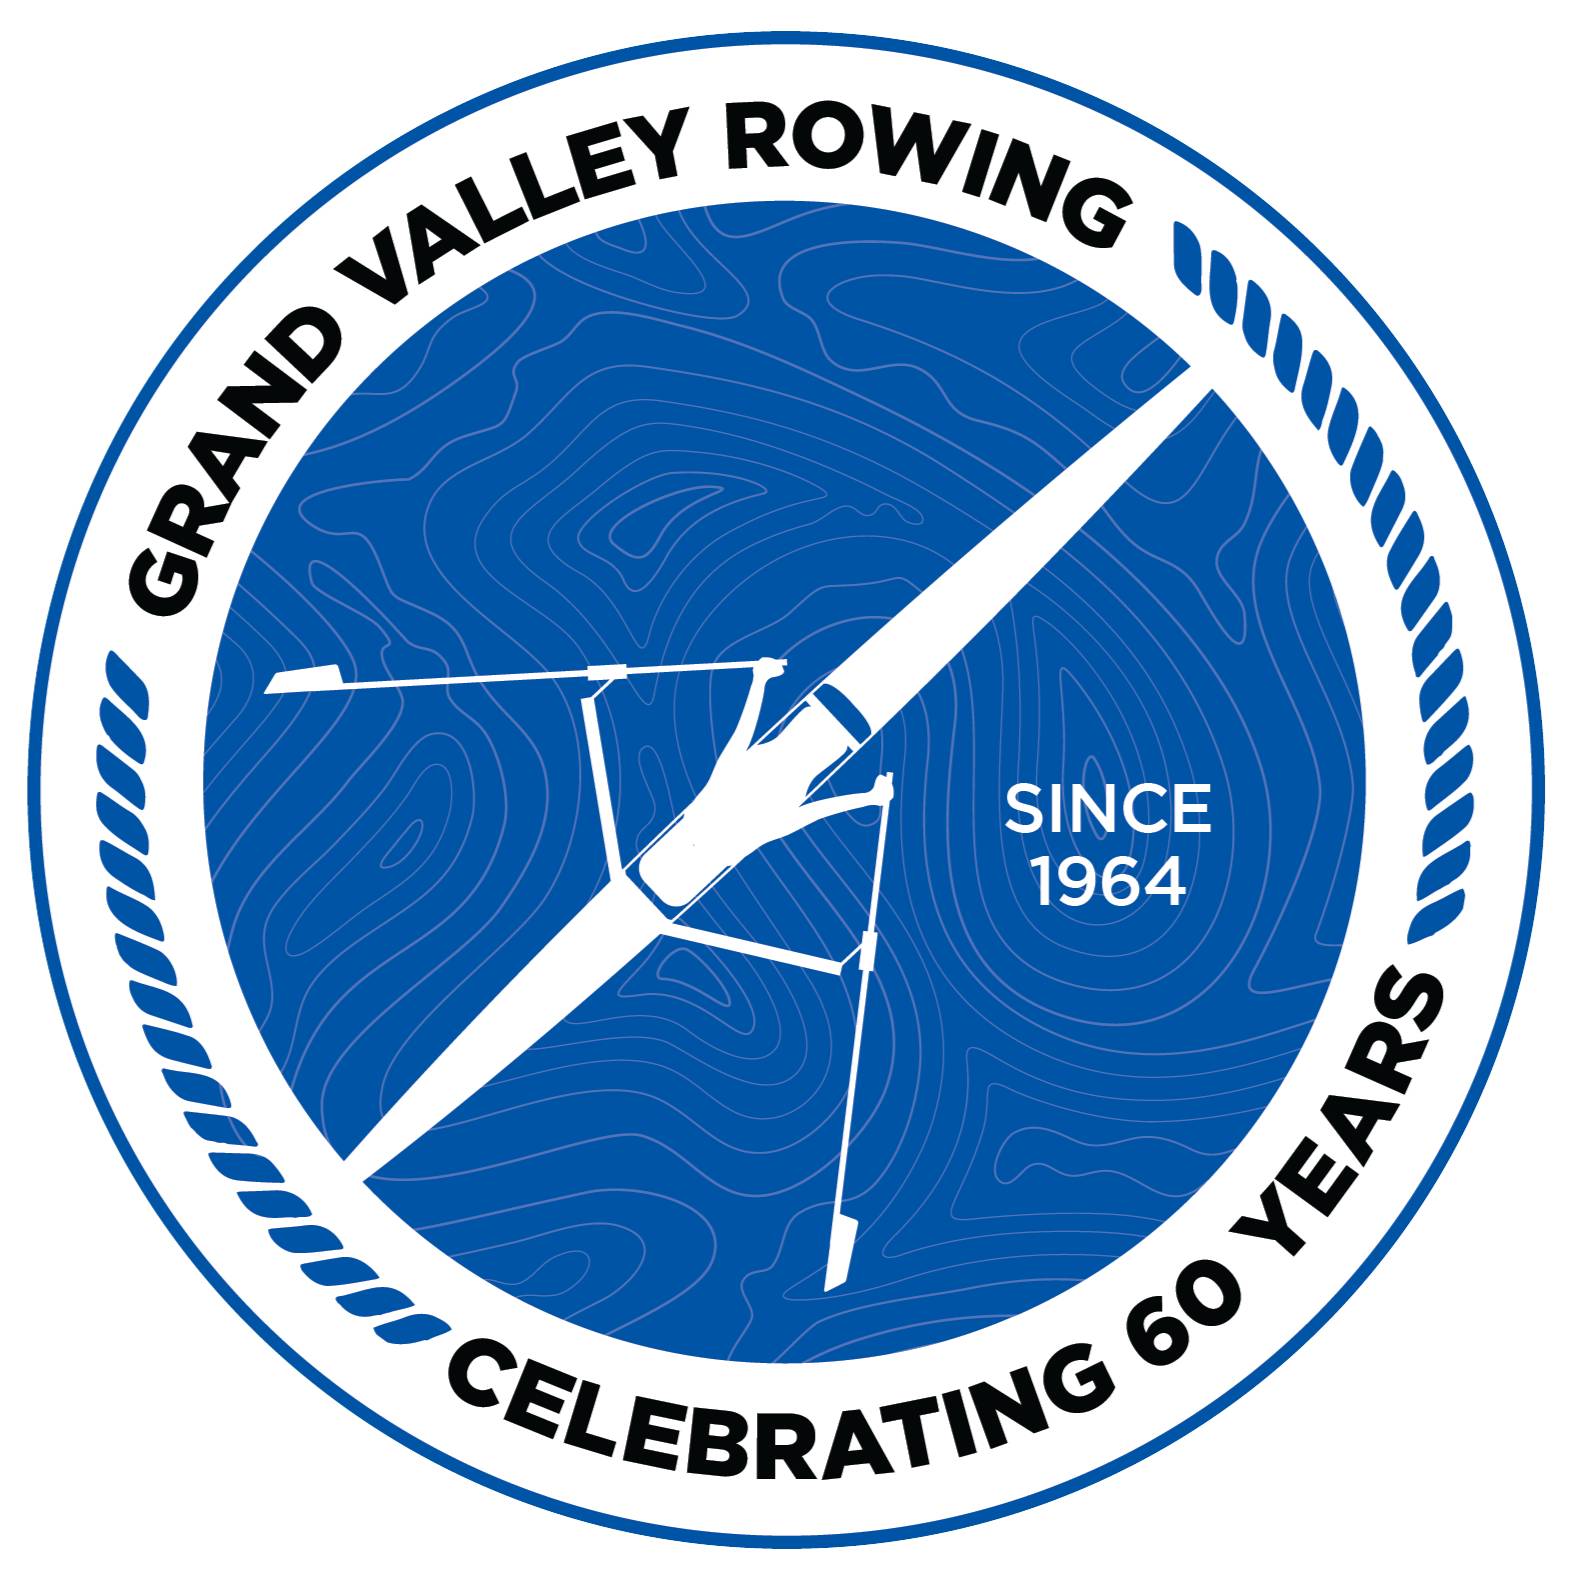 Grand Valley Rowing Since 1964